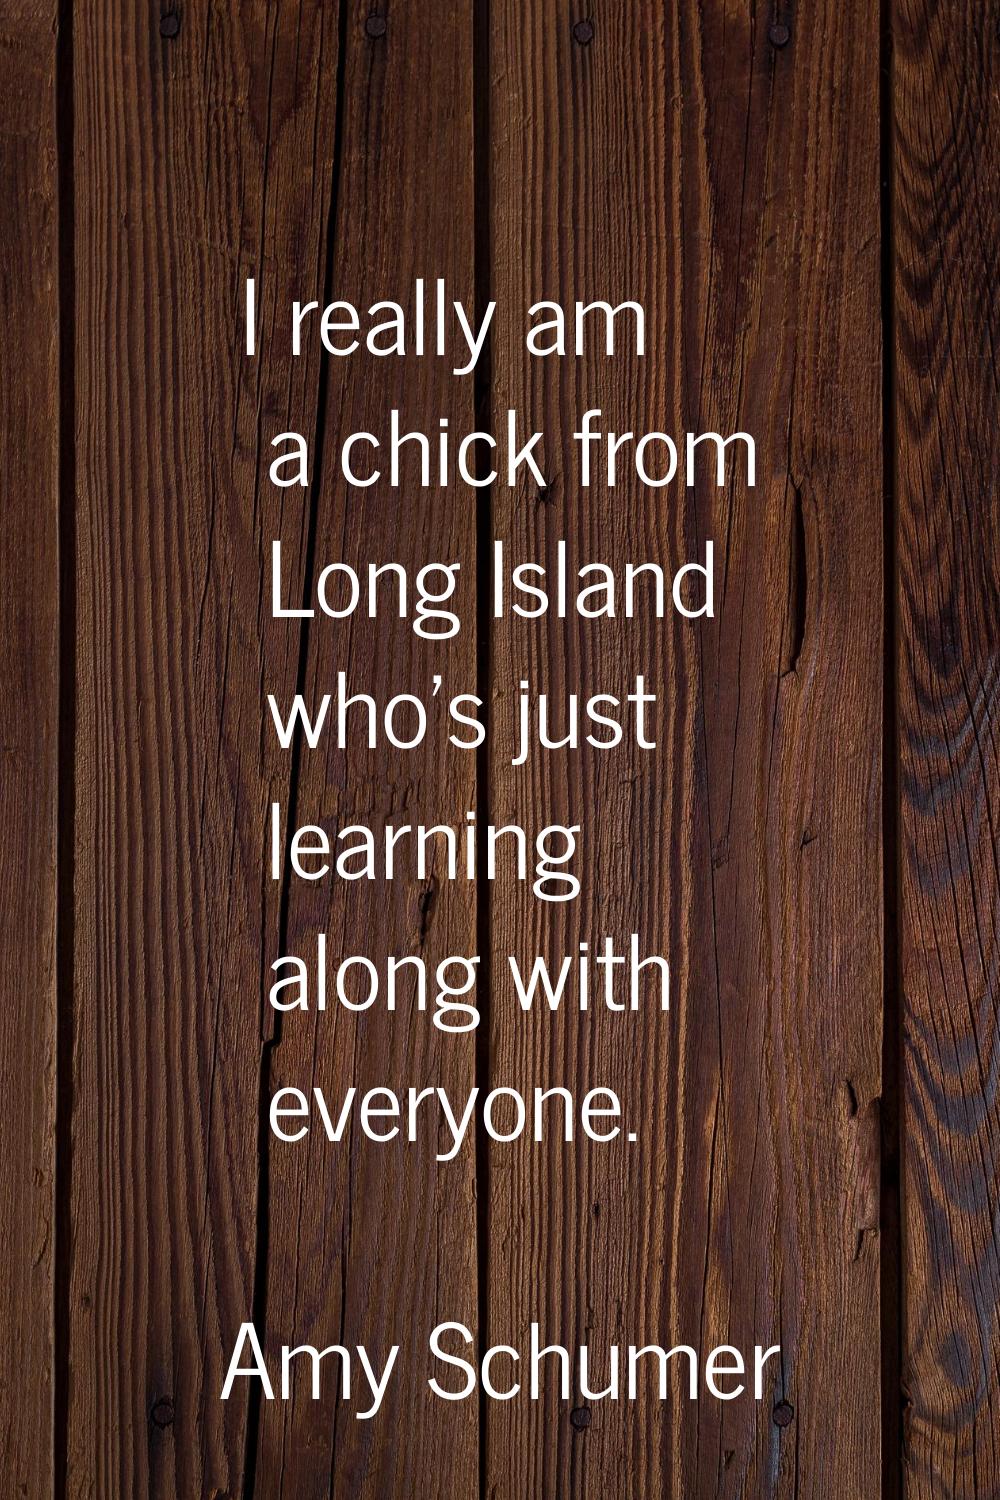 I really am a chick from Long Island who's just learning along with everyone.